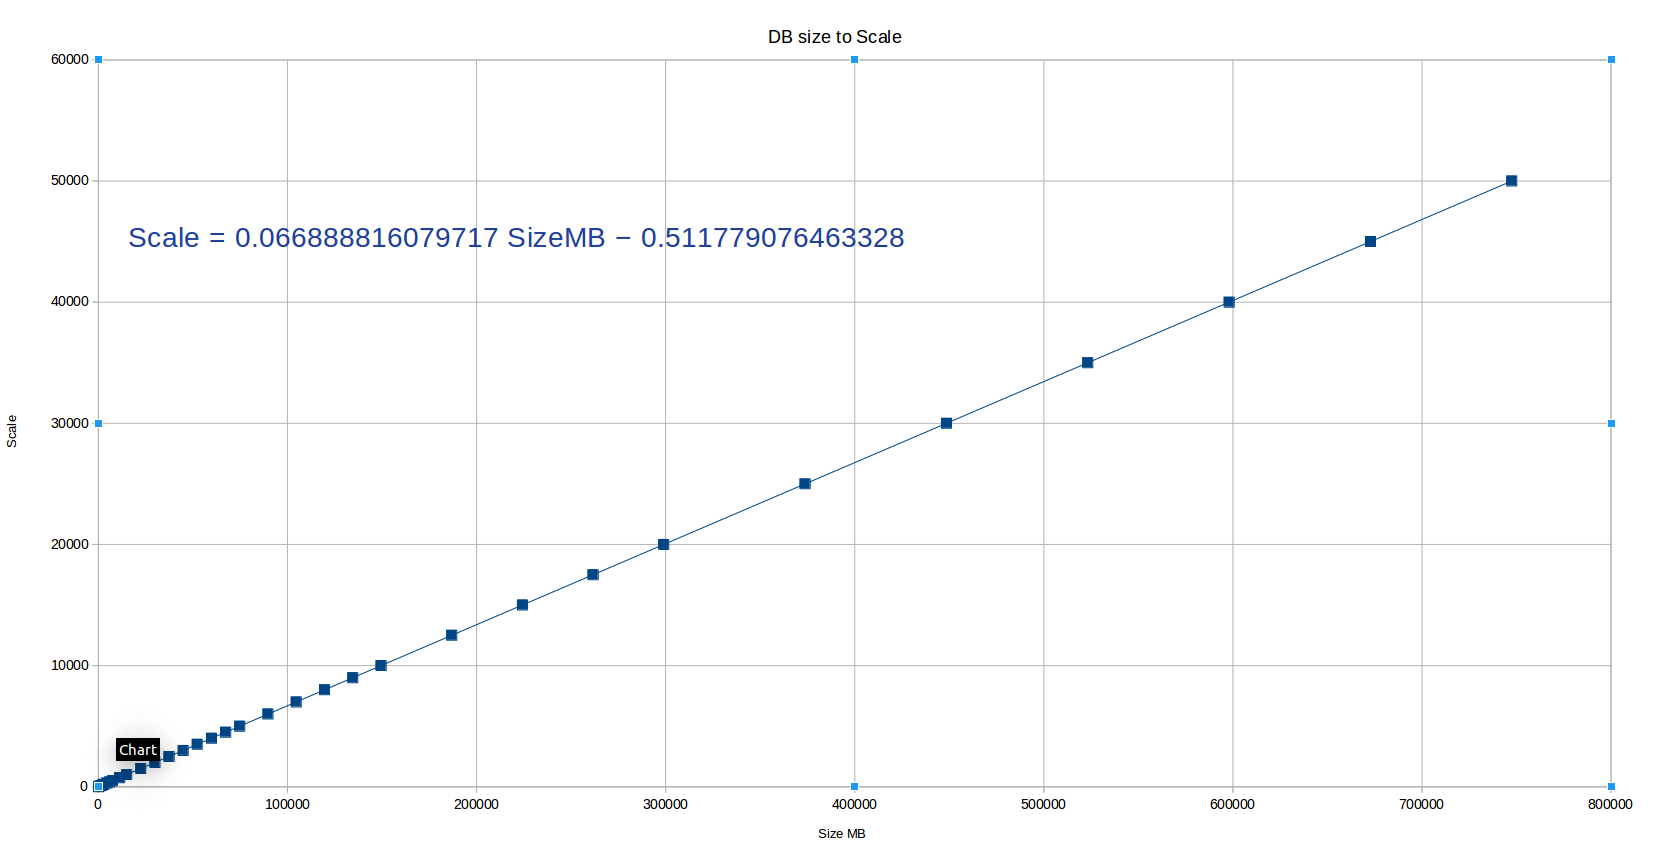 DB size to Scale graph